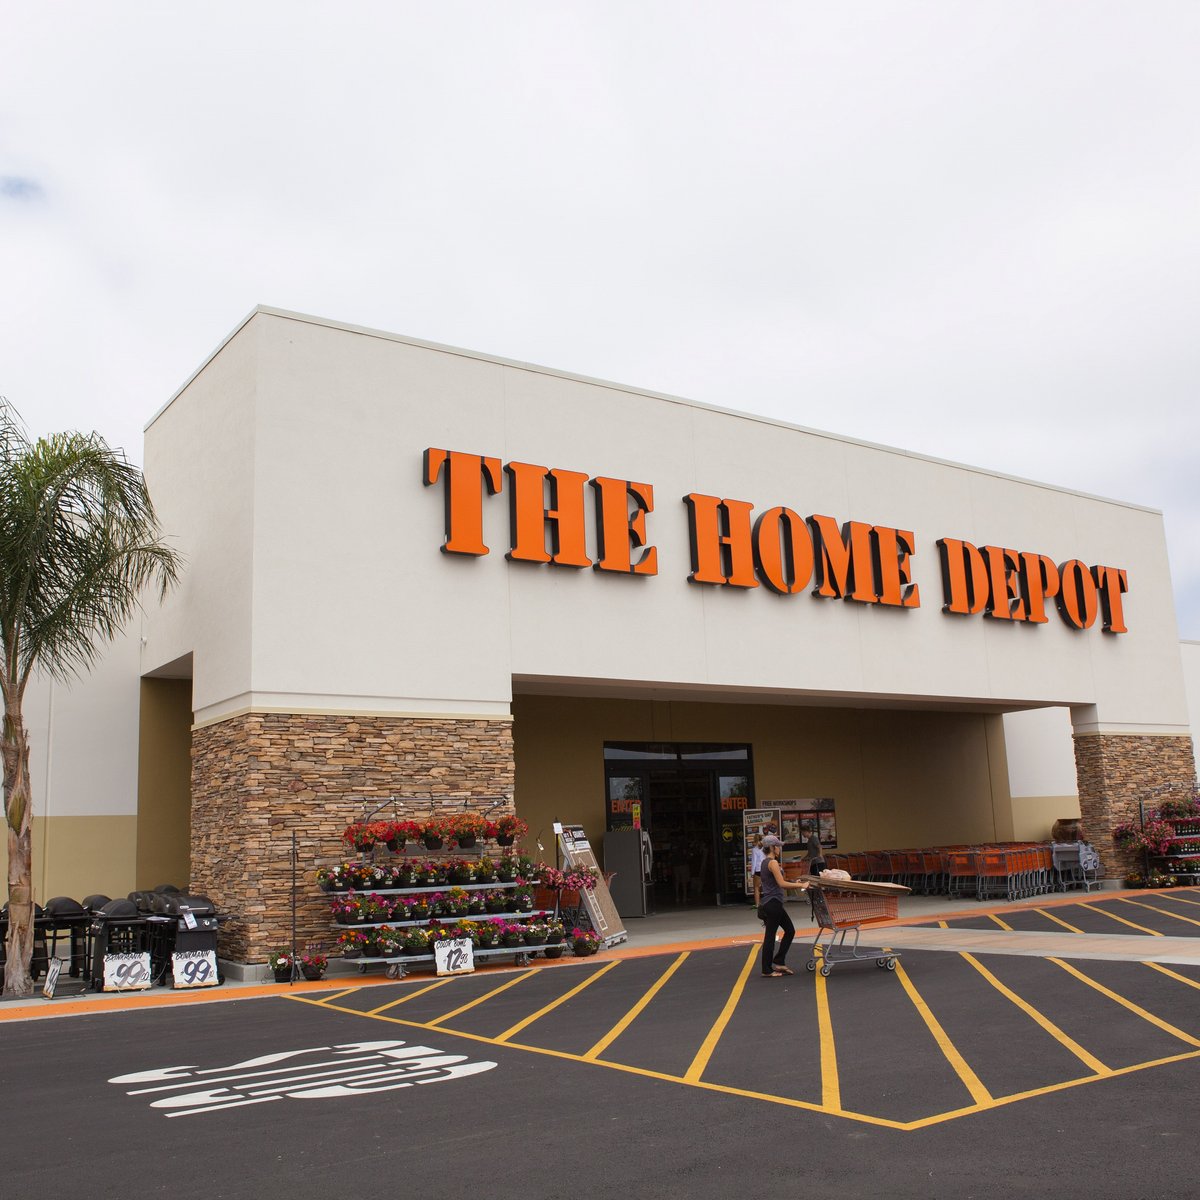 Home Depot makes more changes at stores due to COVID-19 - Atlanta